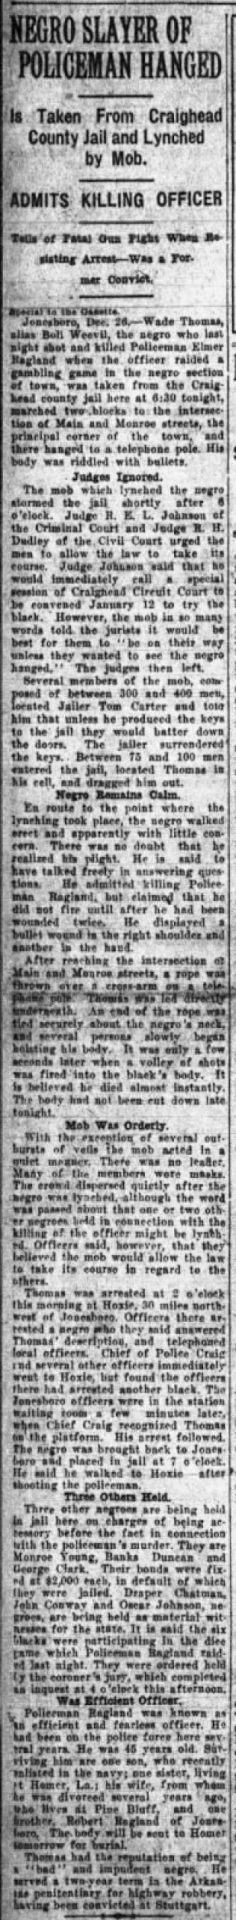 "Negro slayer of policeman hanged" newspaper clipping